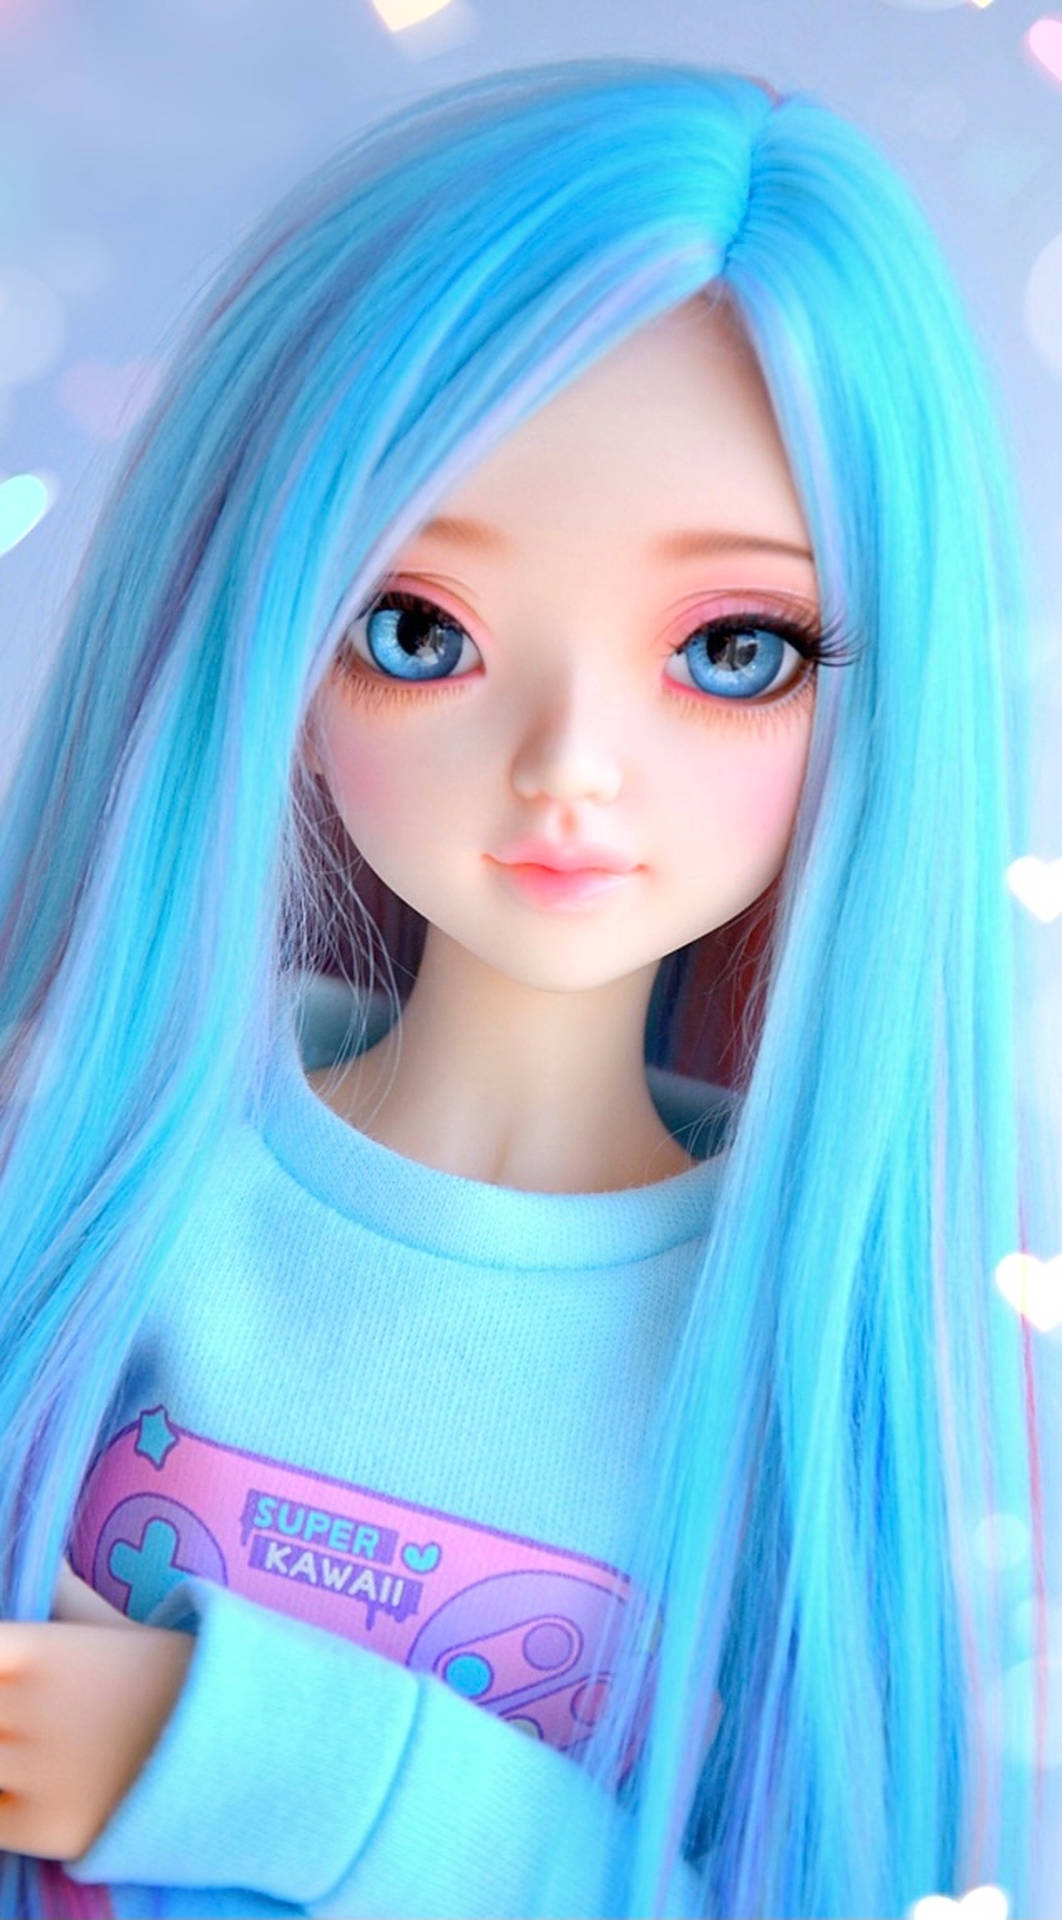 Cute Doll wallpapers is with Dania... - Cute Doll wallpapers | Facebook